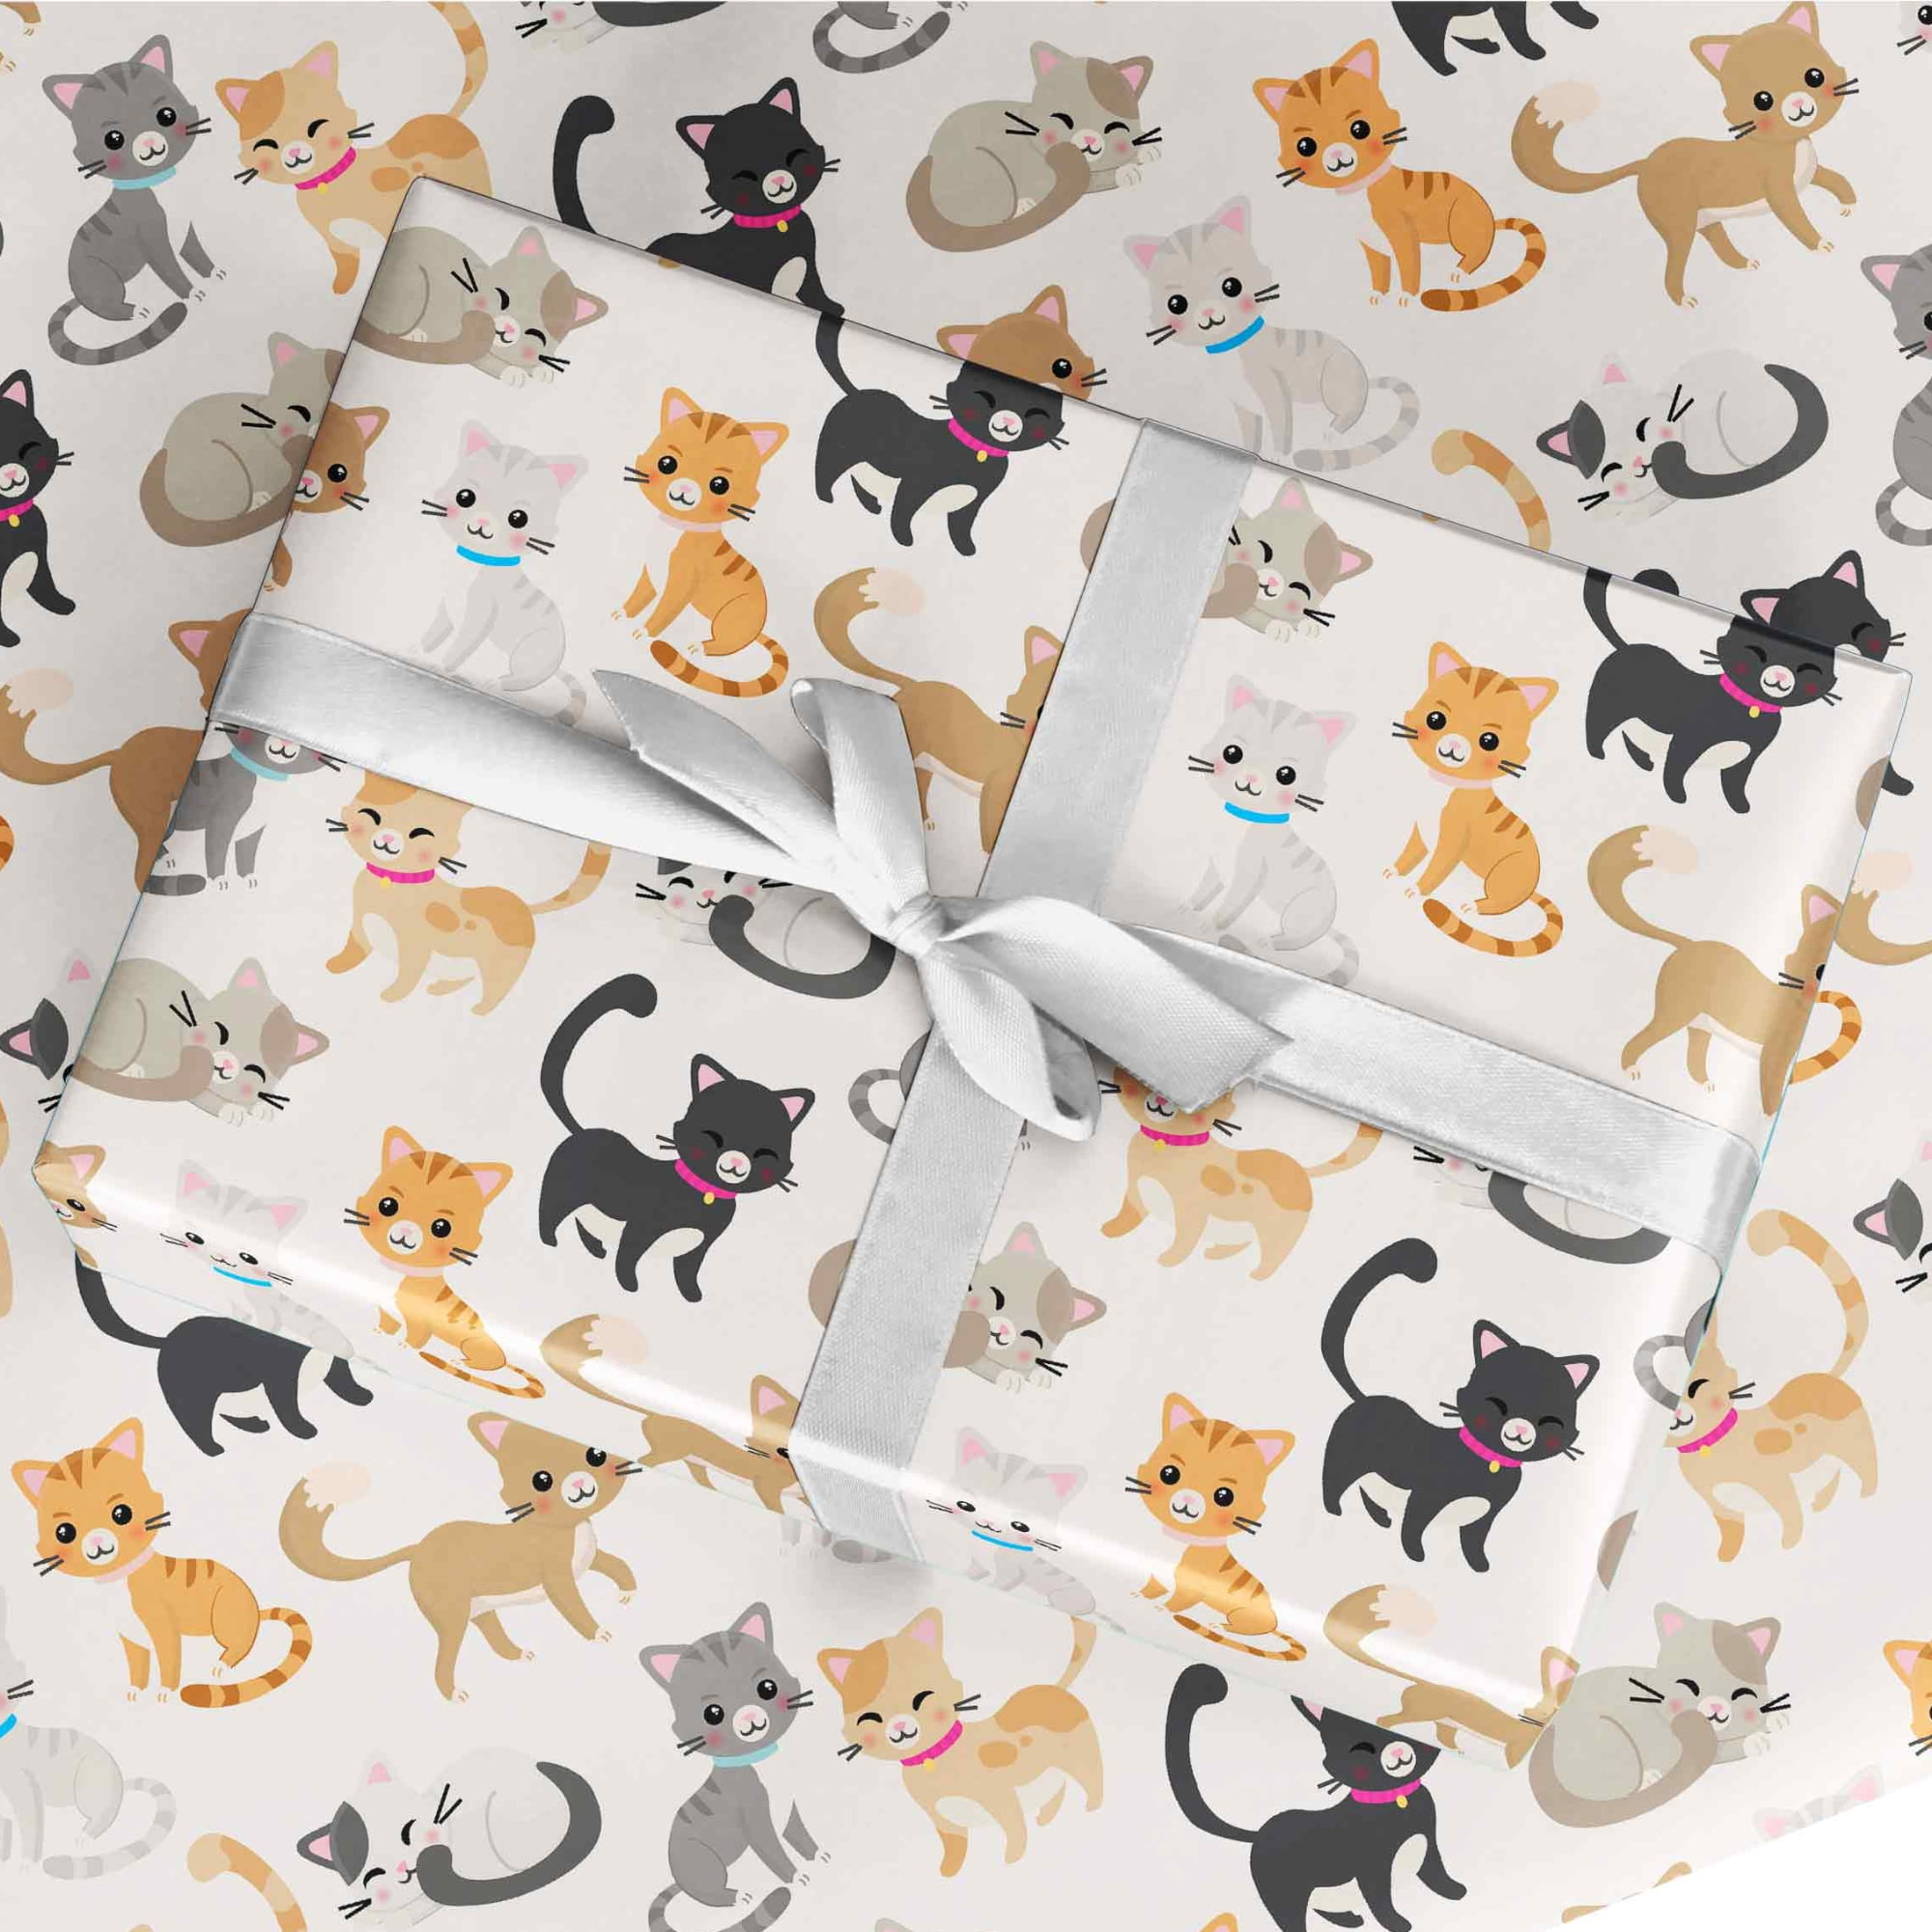  CENTRAL 23 Birthday Wrapping Paper - Cats in Party Hats - 6  Sheets of Wrapping Paper for Her - For Girls and Boys - Cat Gift Wrap for  Pet Owner With Tags - Recyclable : Pet Supplies